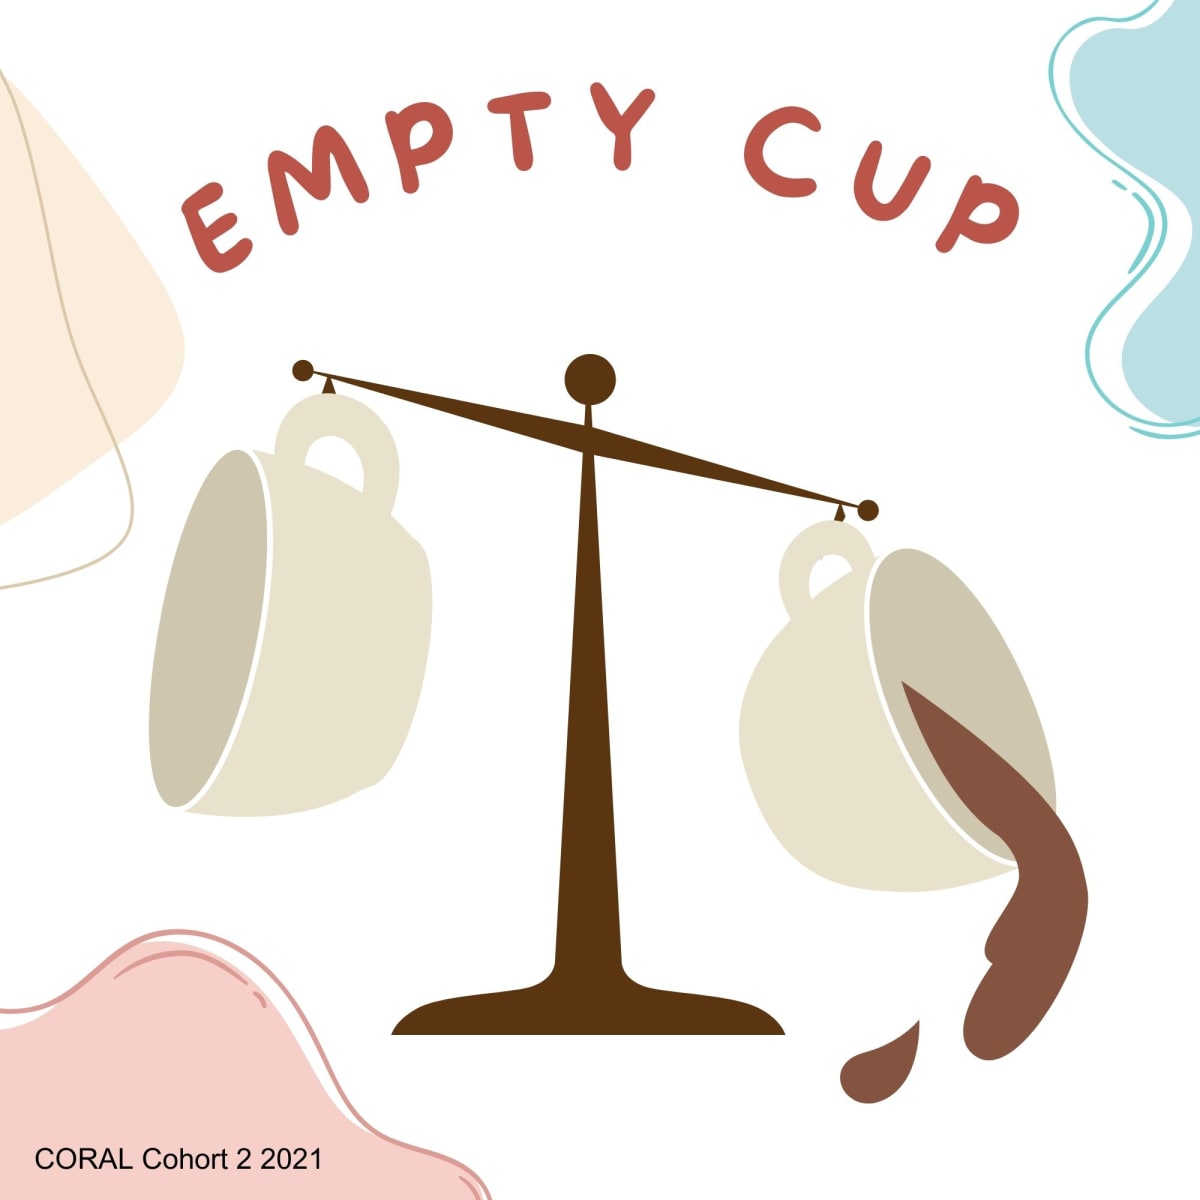 Empty Cup 